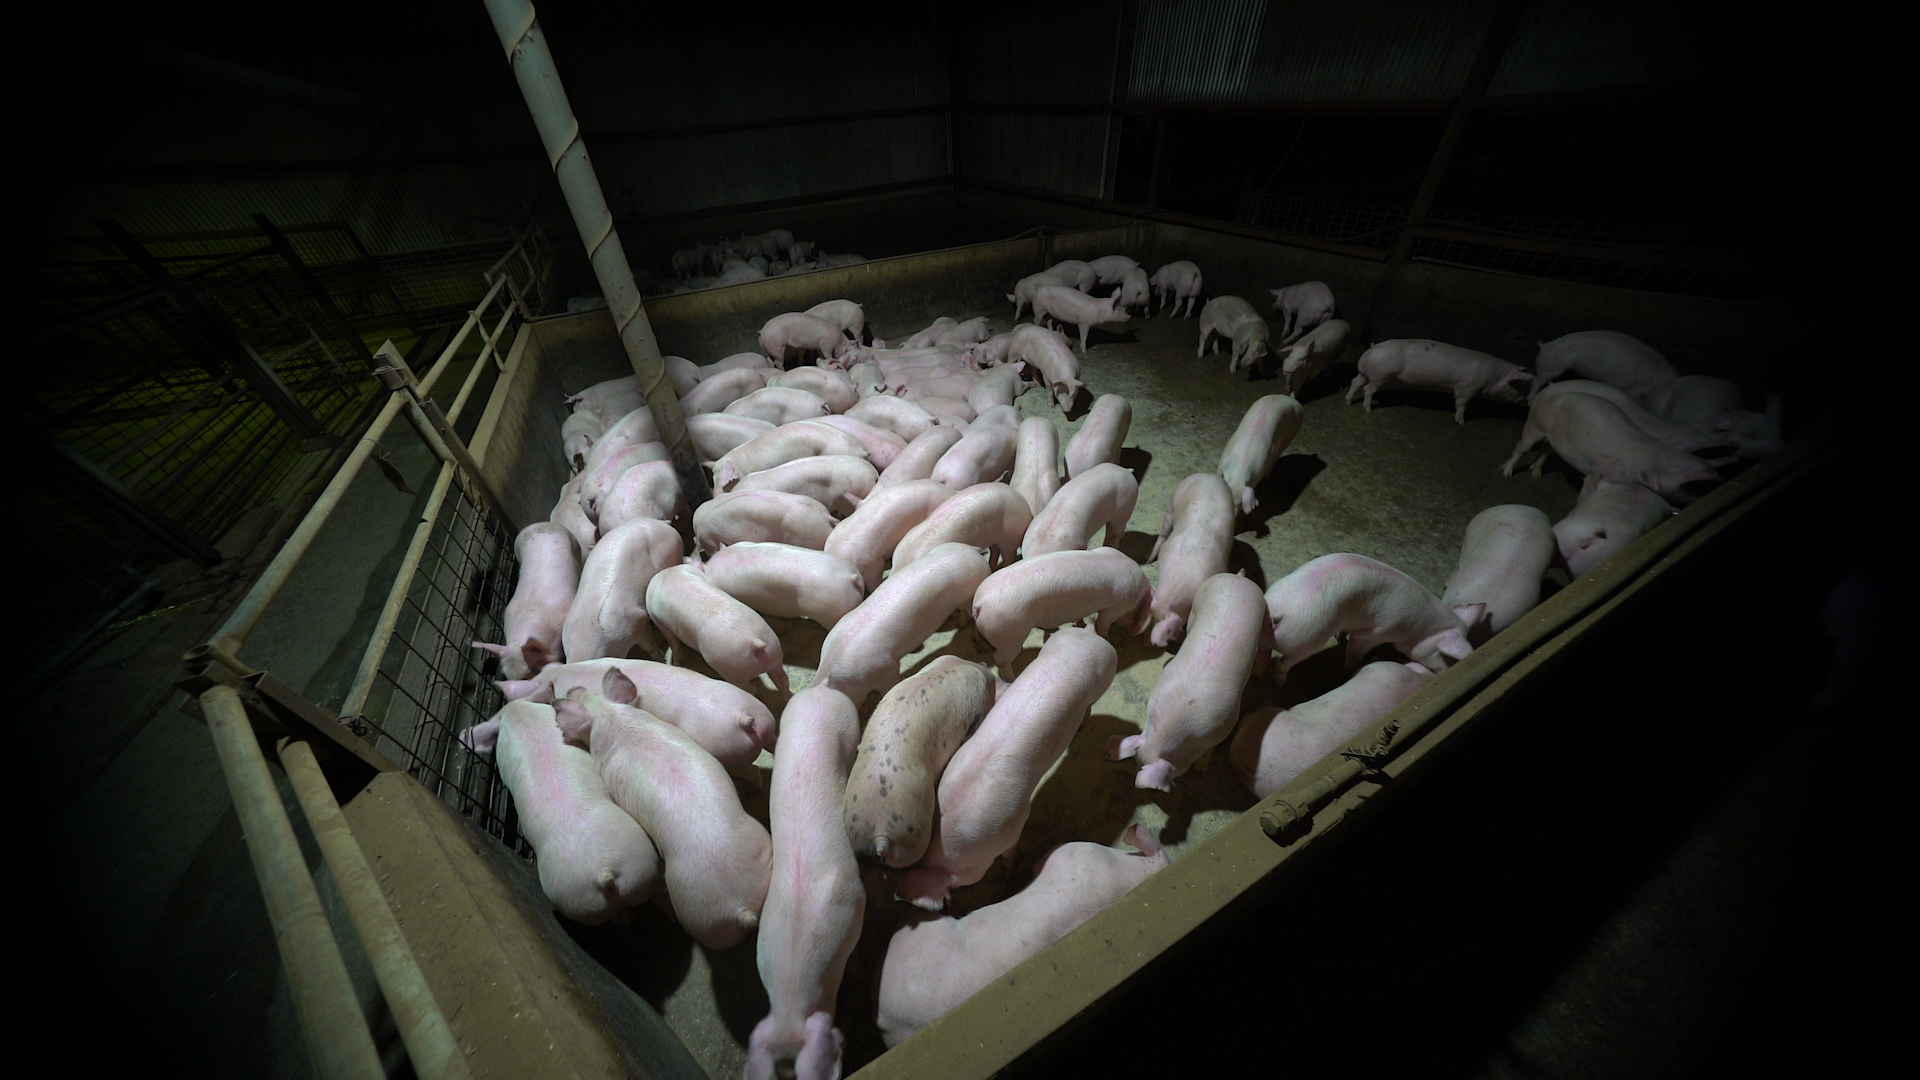 Pigs are left in horrible conditions in factory farms